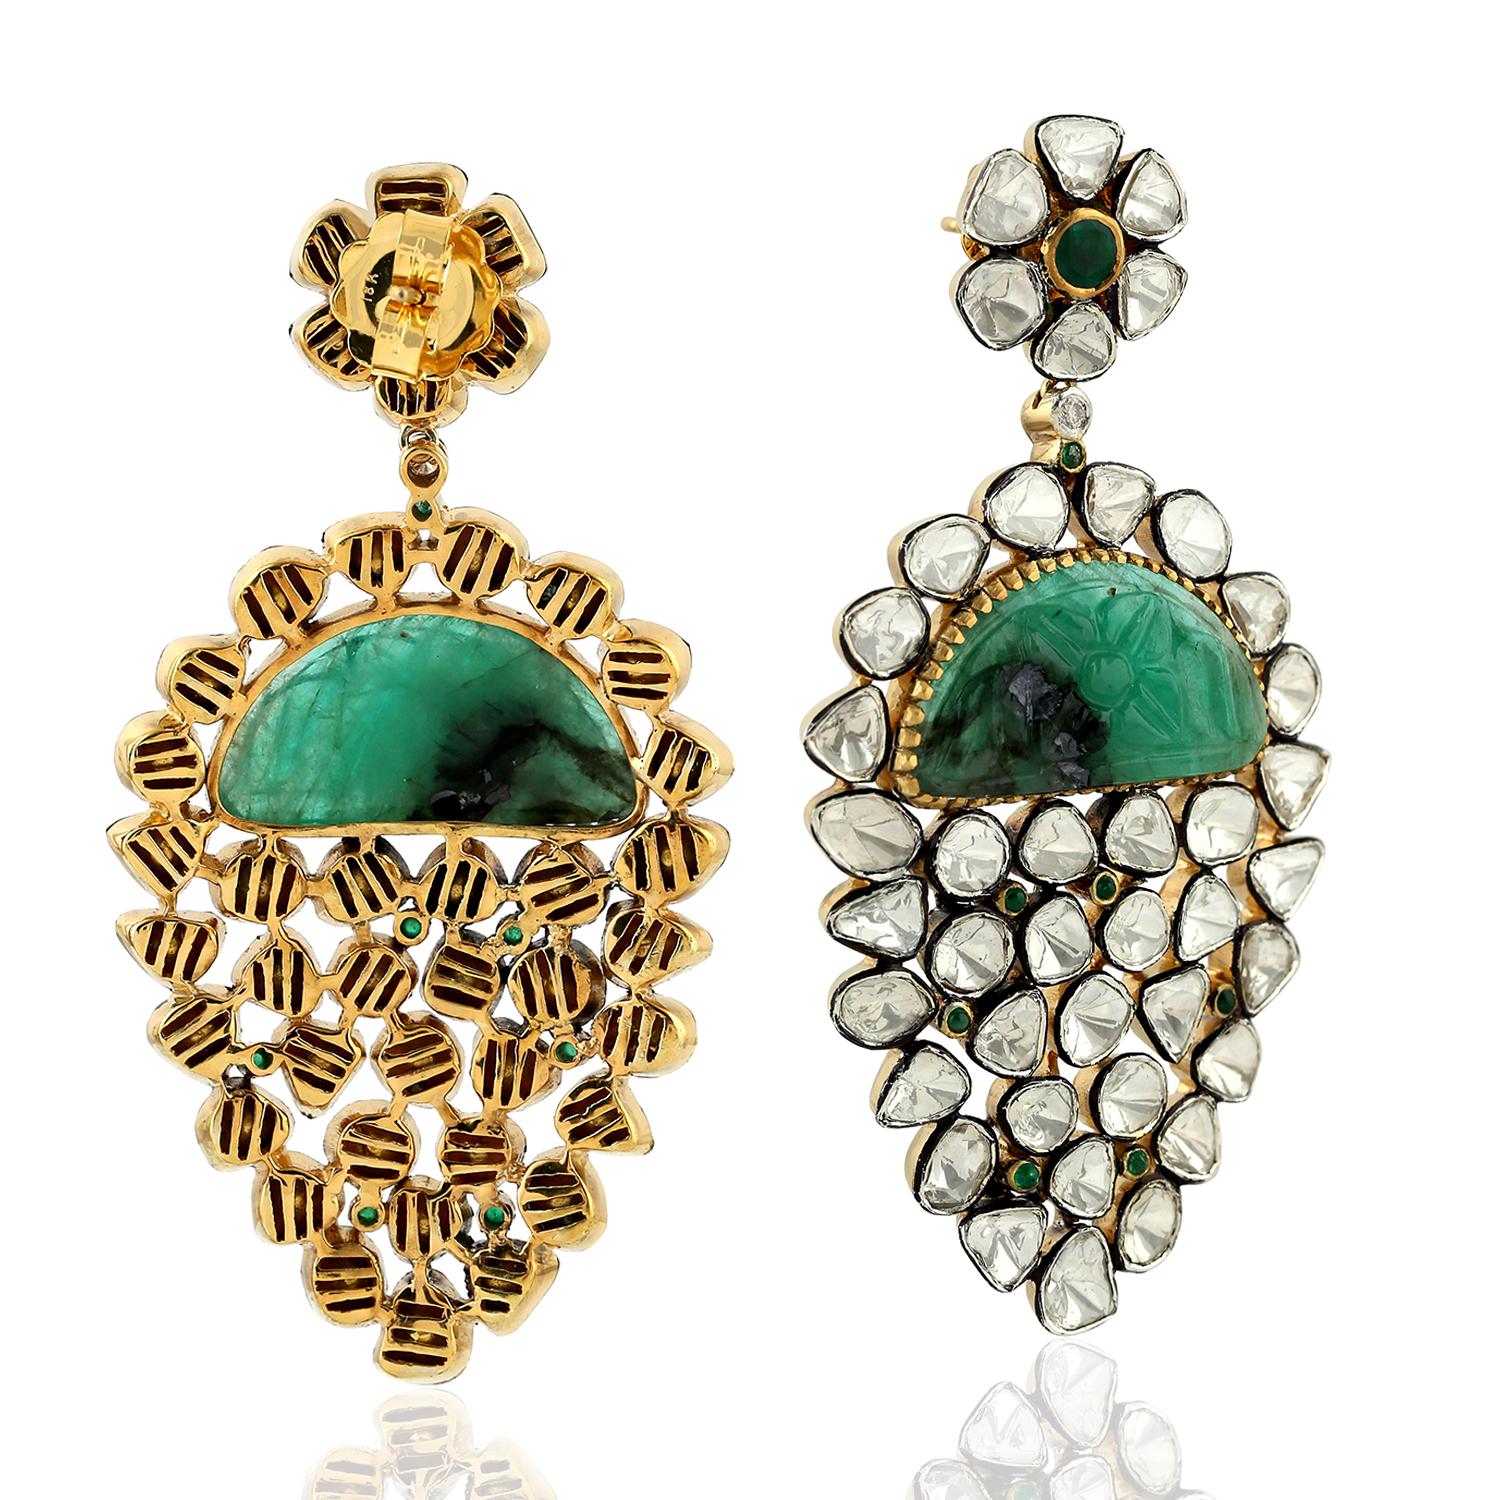 Victorian 15.66ct Rose Cut Diamonds Earrings With Carved Emerald In 18k Gold & Silver For Sale